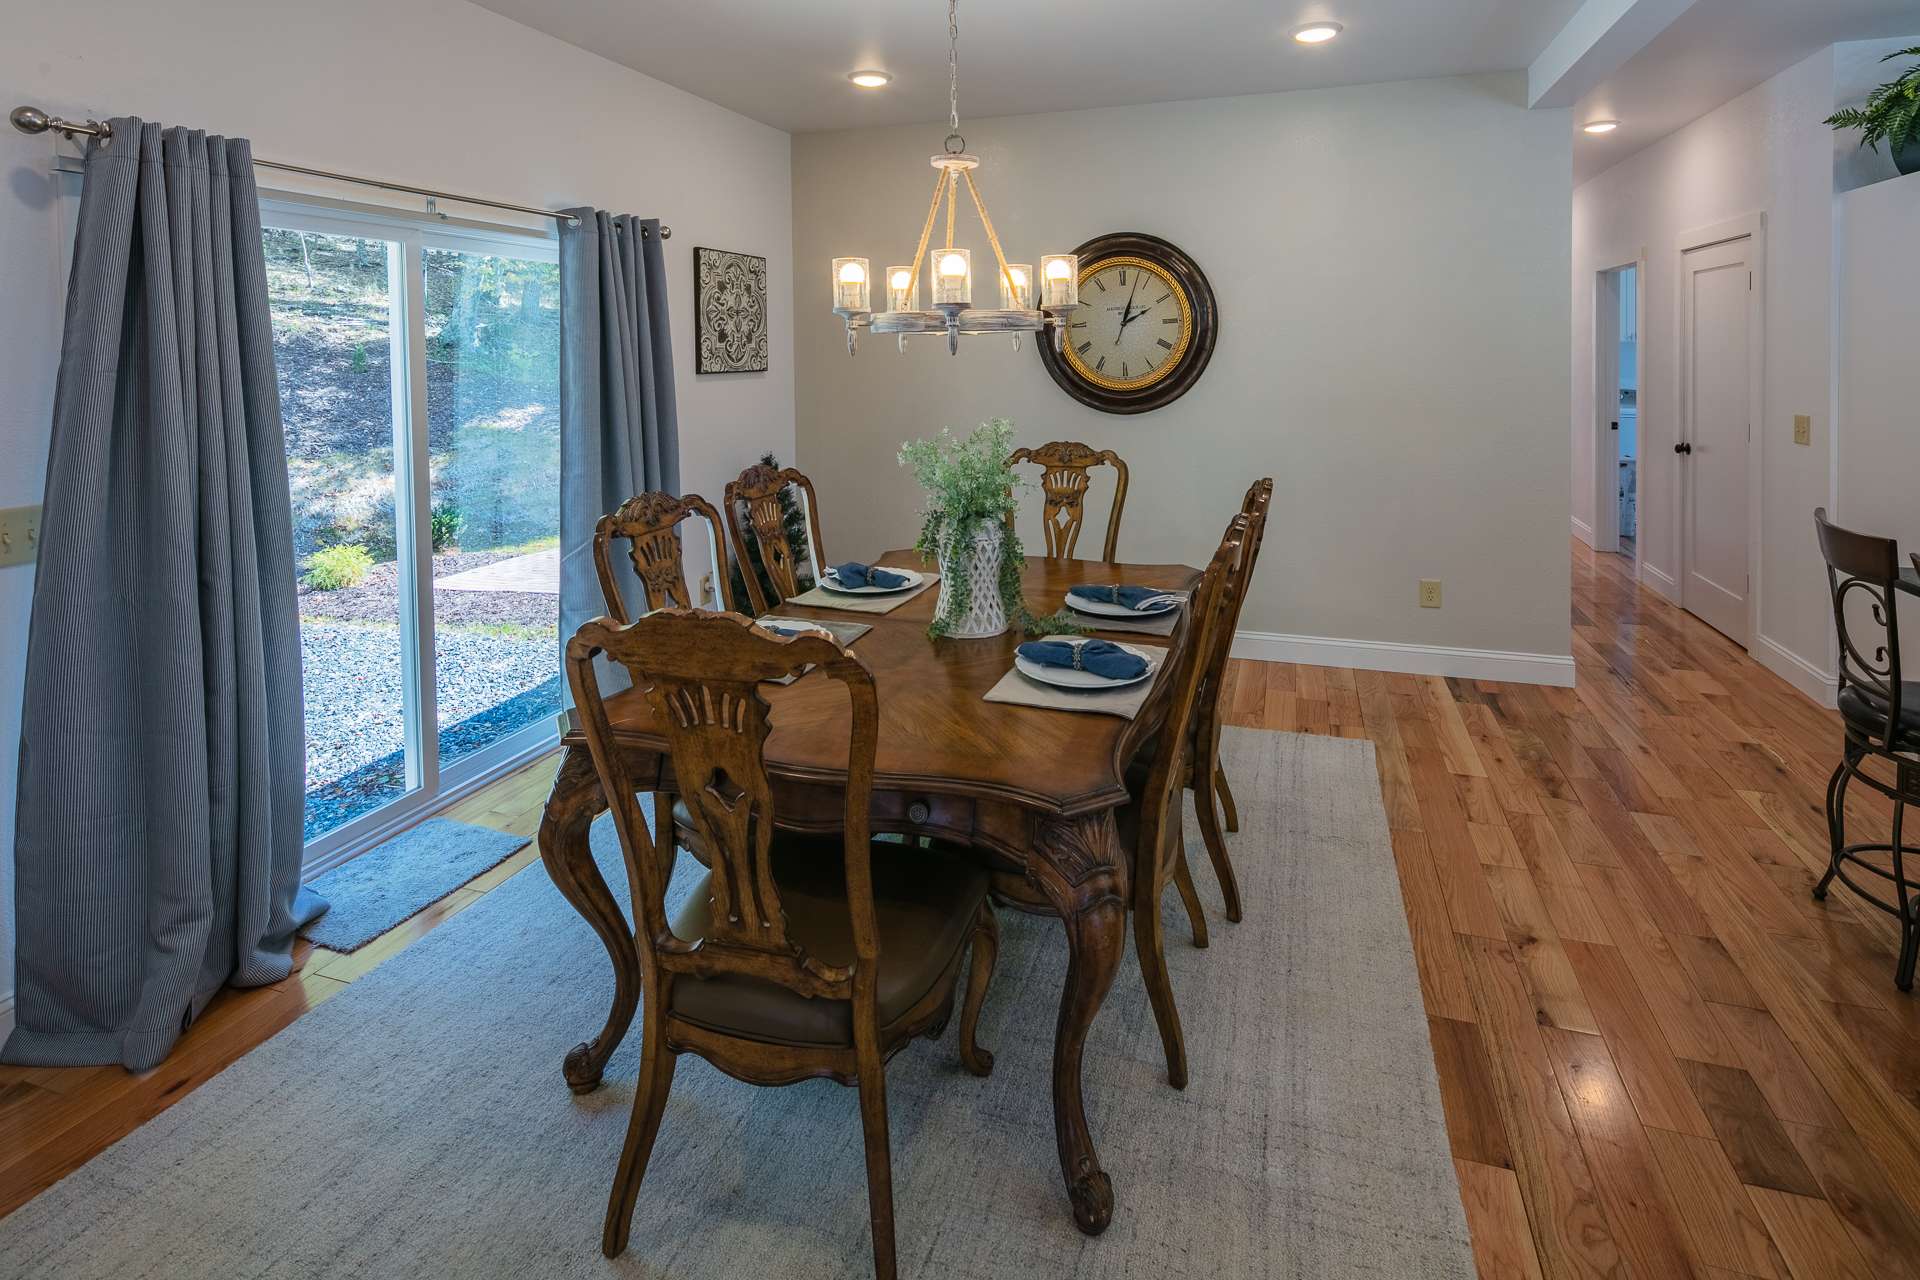 This formal dining area is perfect for entertaining dinner guests and Holiday gatherings.  There is easy access to the outdoors for alfresco grilling and dining.